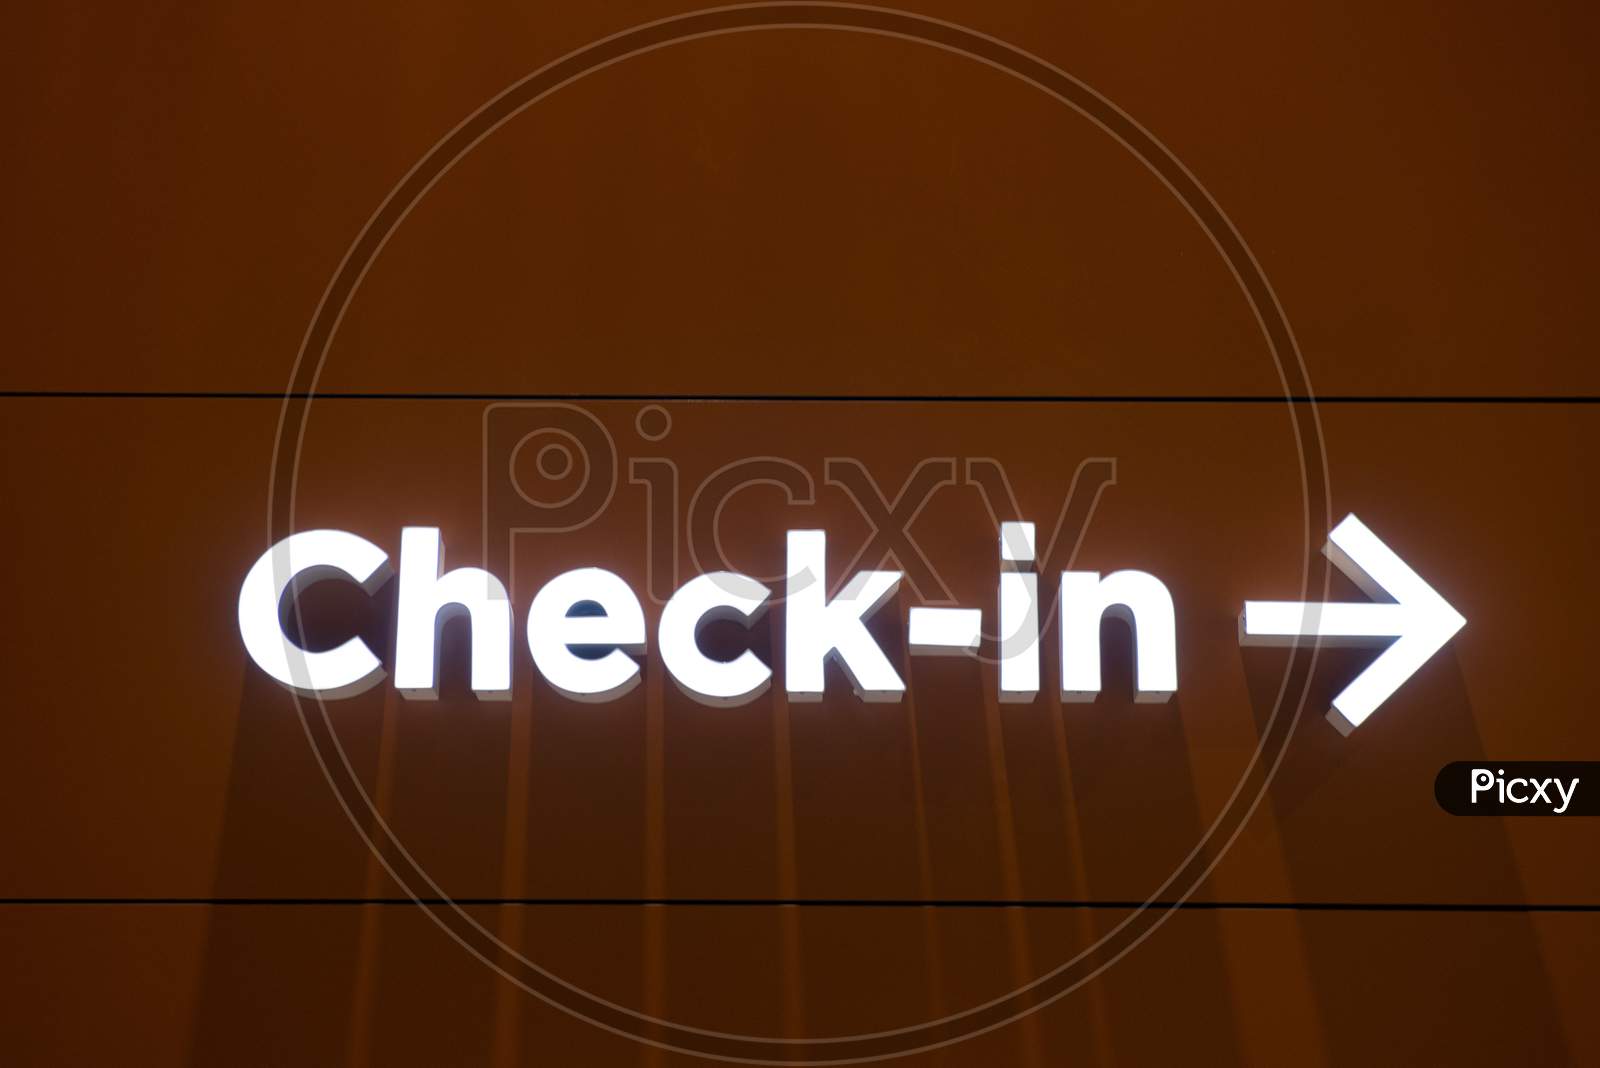 Airport Check-In Illuminated Sign With A Arrow Pointing To Right In A Wall.